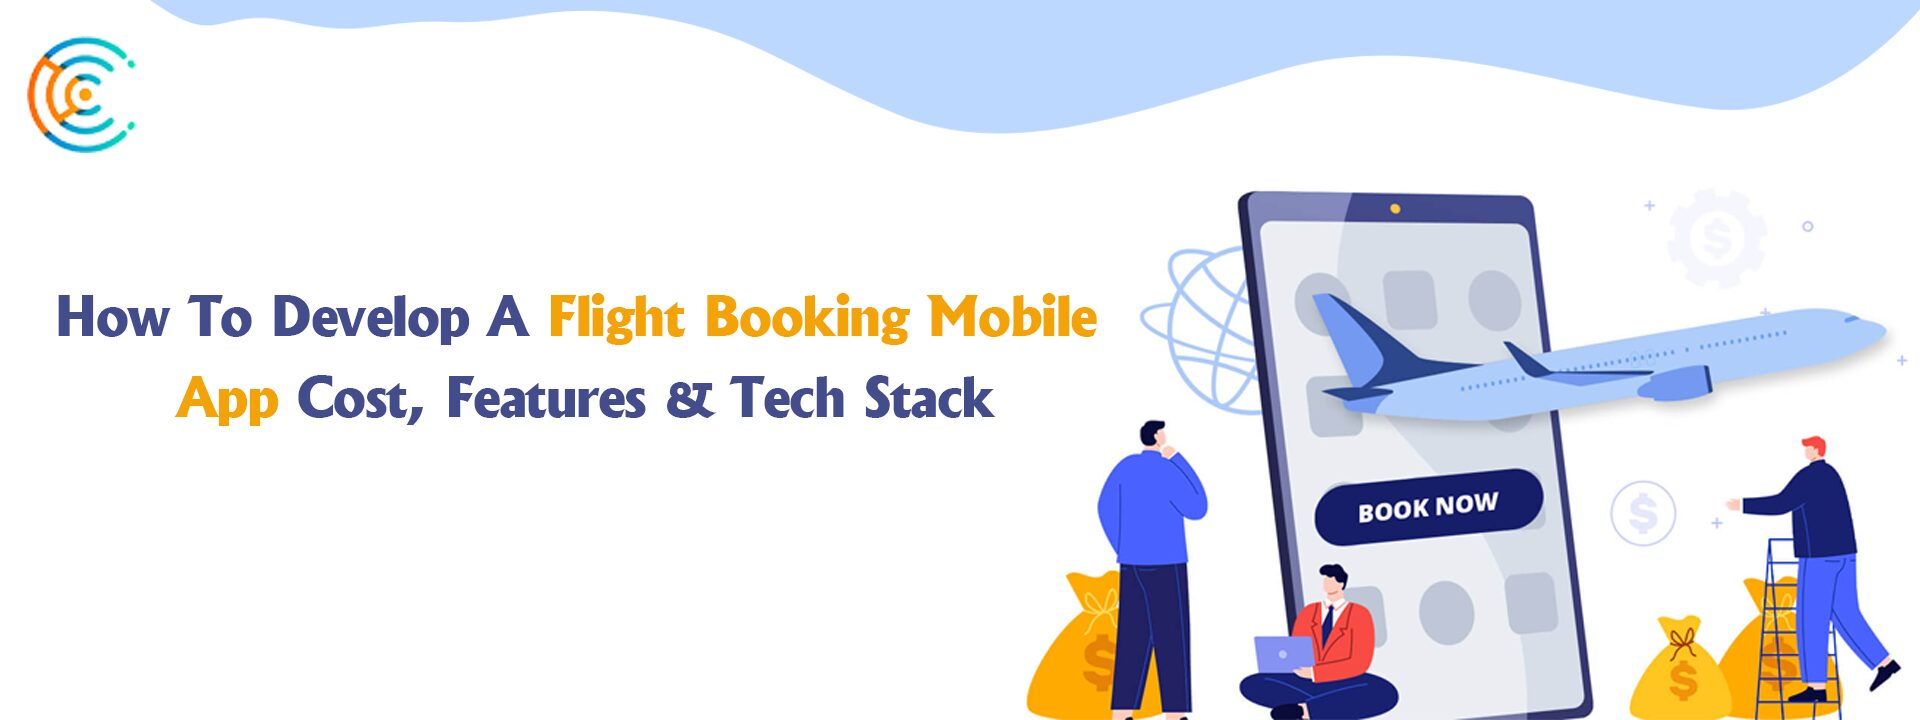 How To Develop A Flight Booking Mobile App Cost